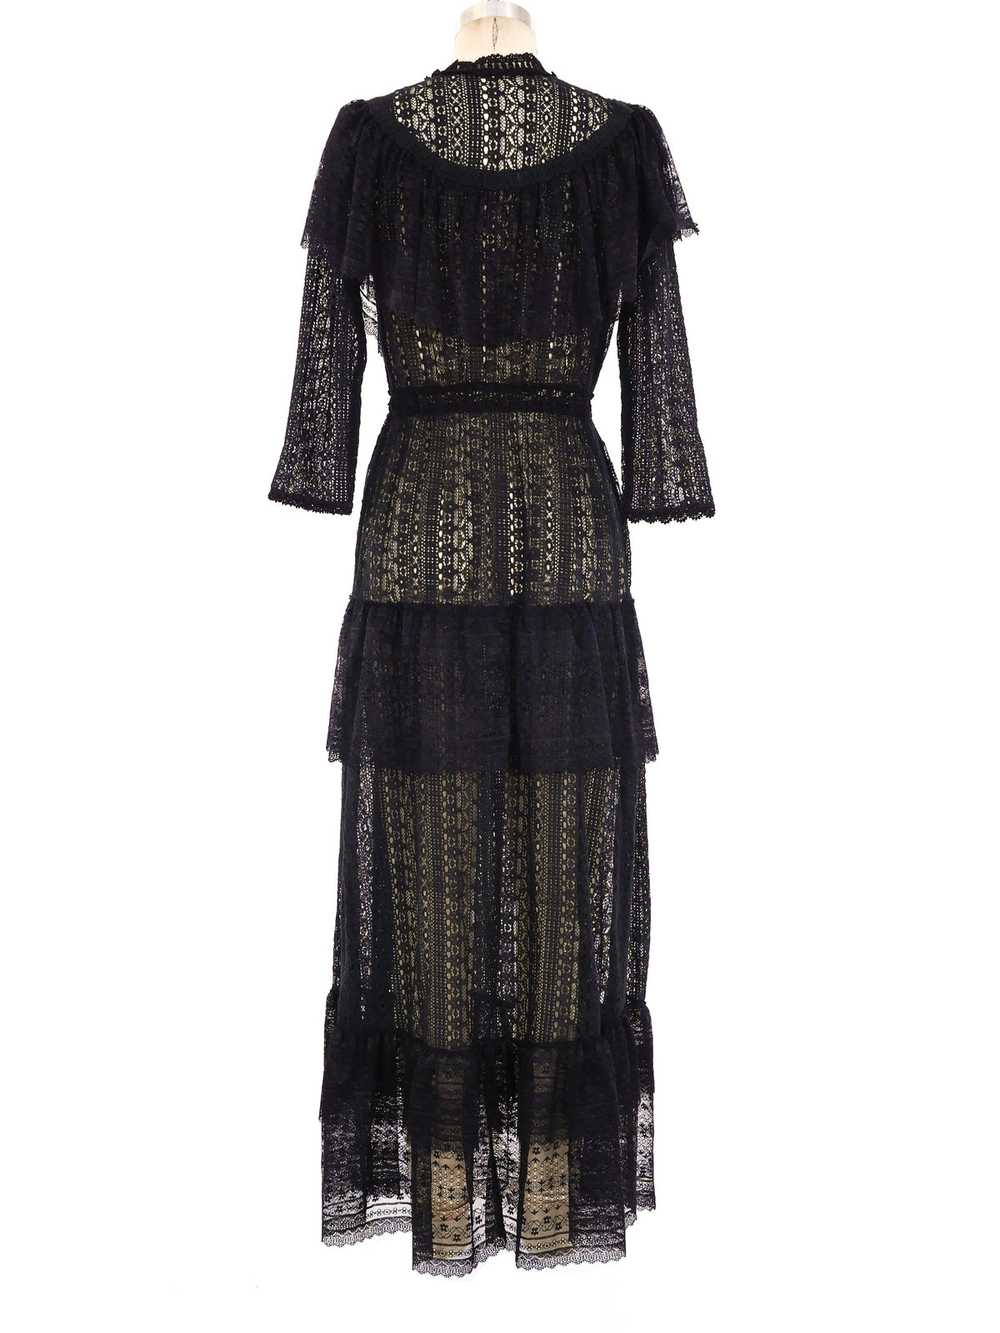 Black Tiered Lace Maxi Dress - image 4